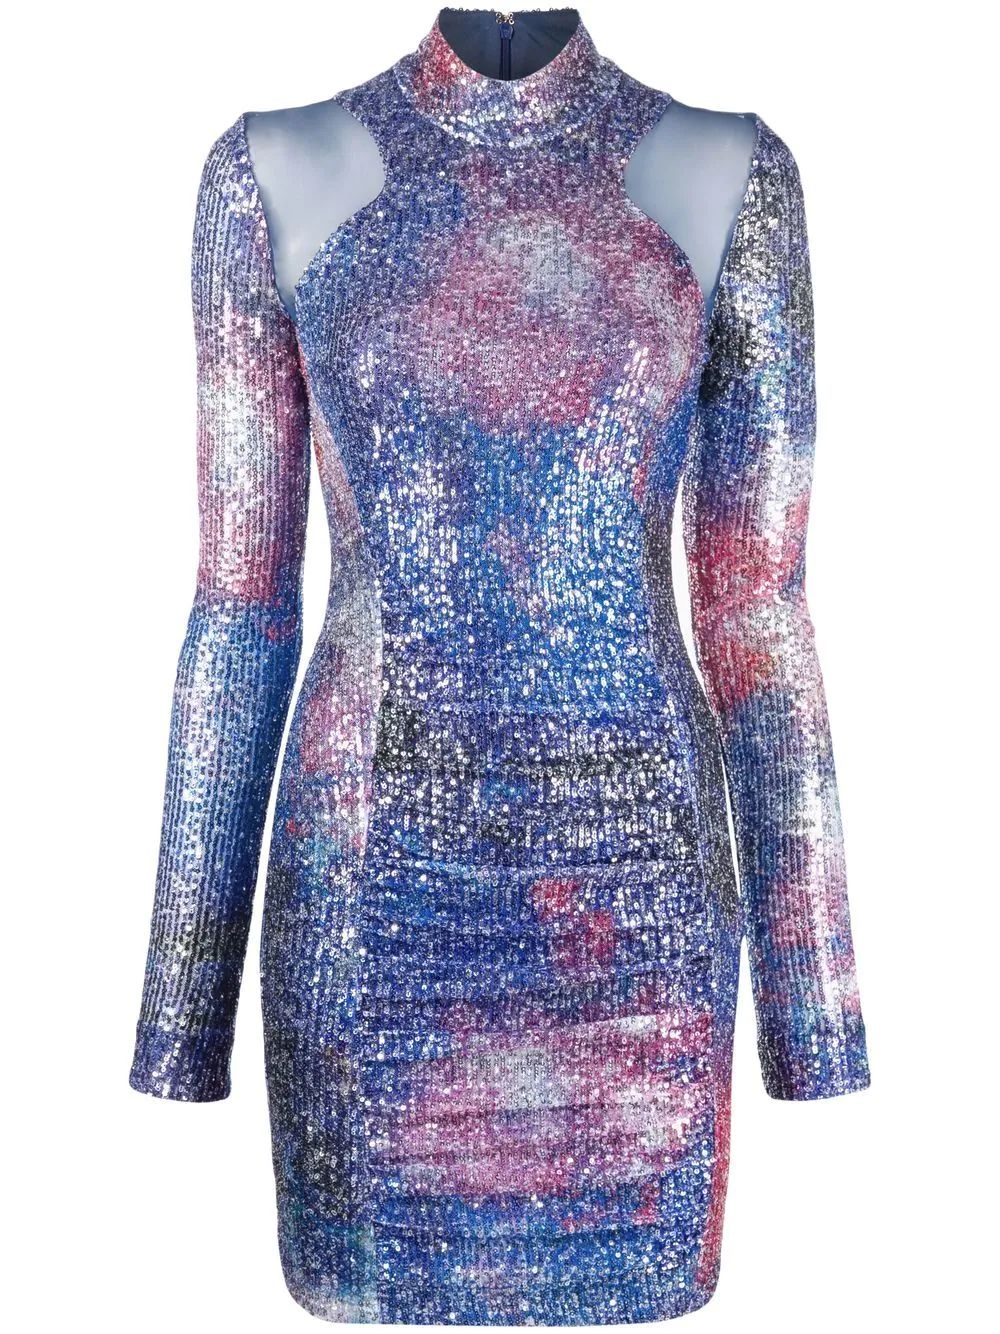 Versace Jeans Couture sequin-embellished Dress - Farfetch | Farfetch Global